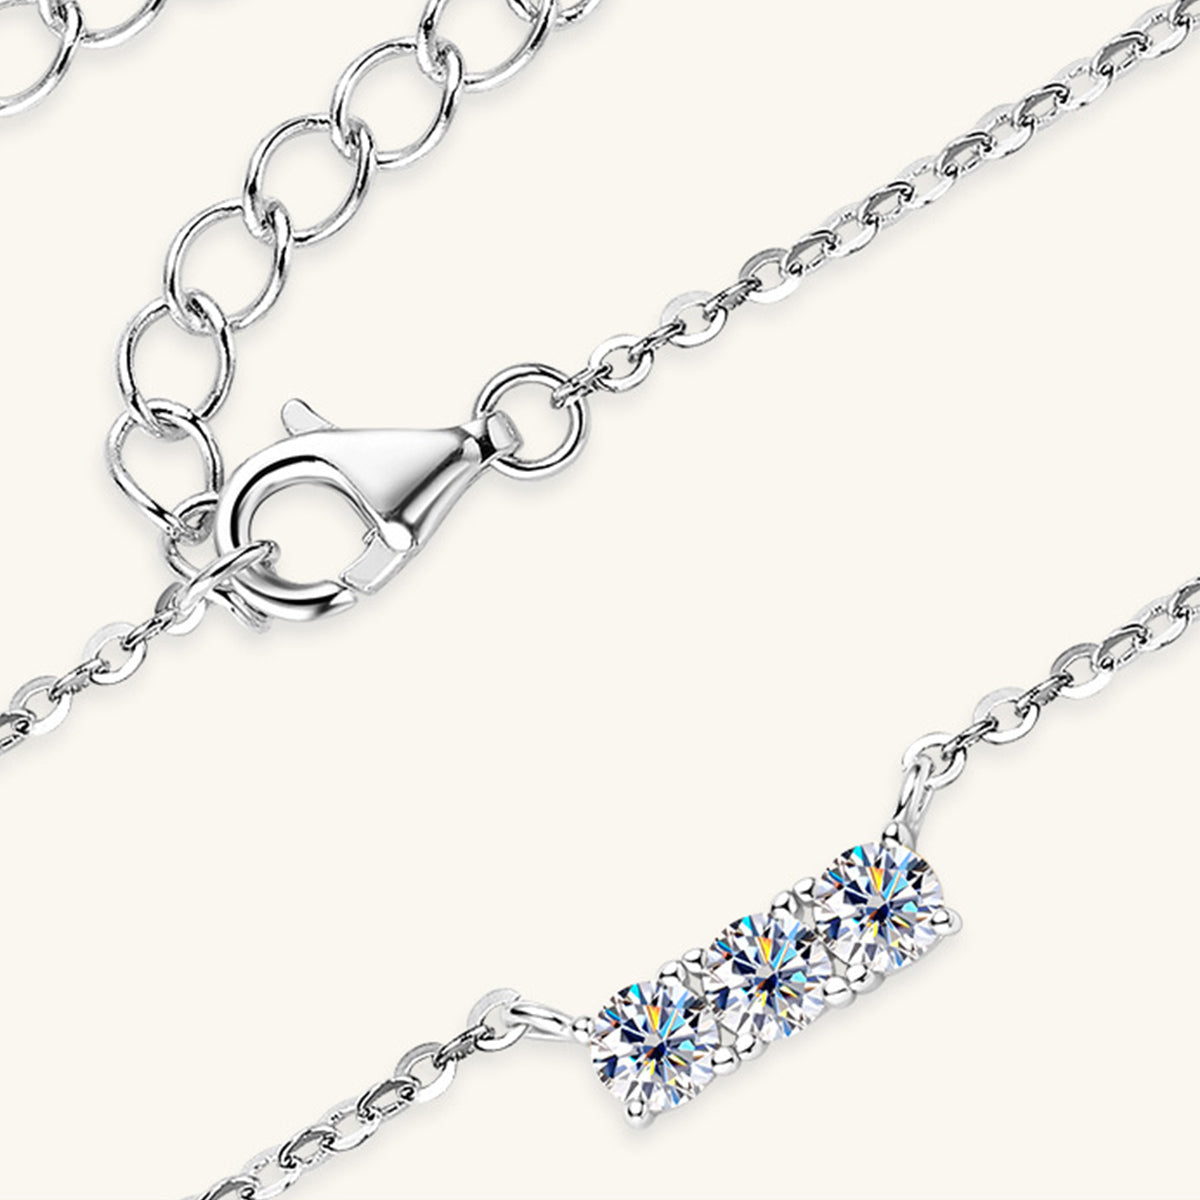 Gold or Silver .925 Sterling Silver Moissanite Necklace